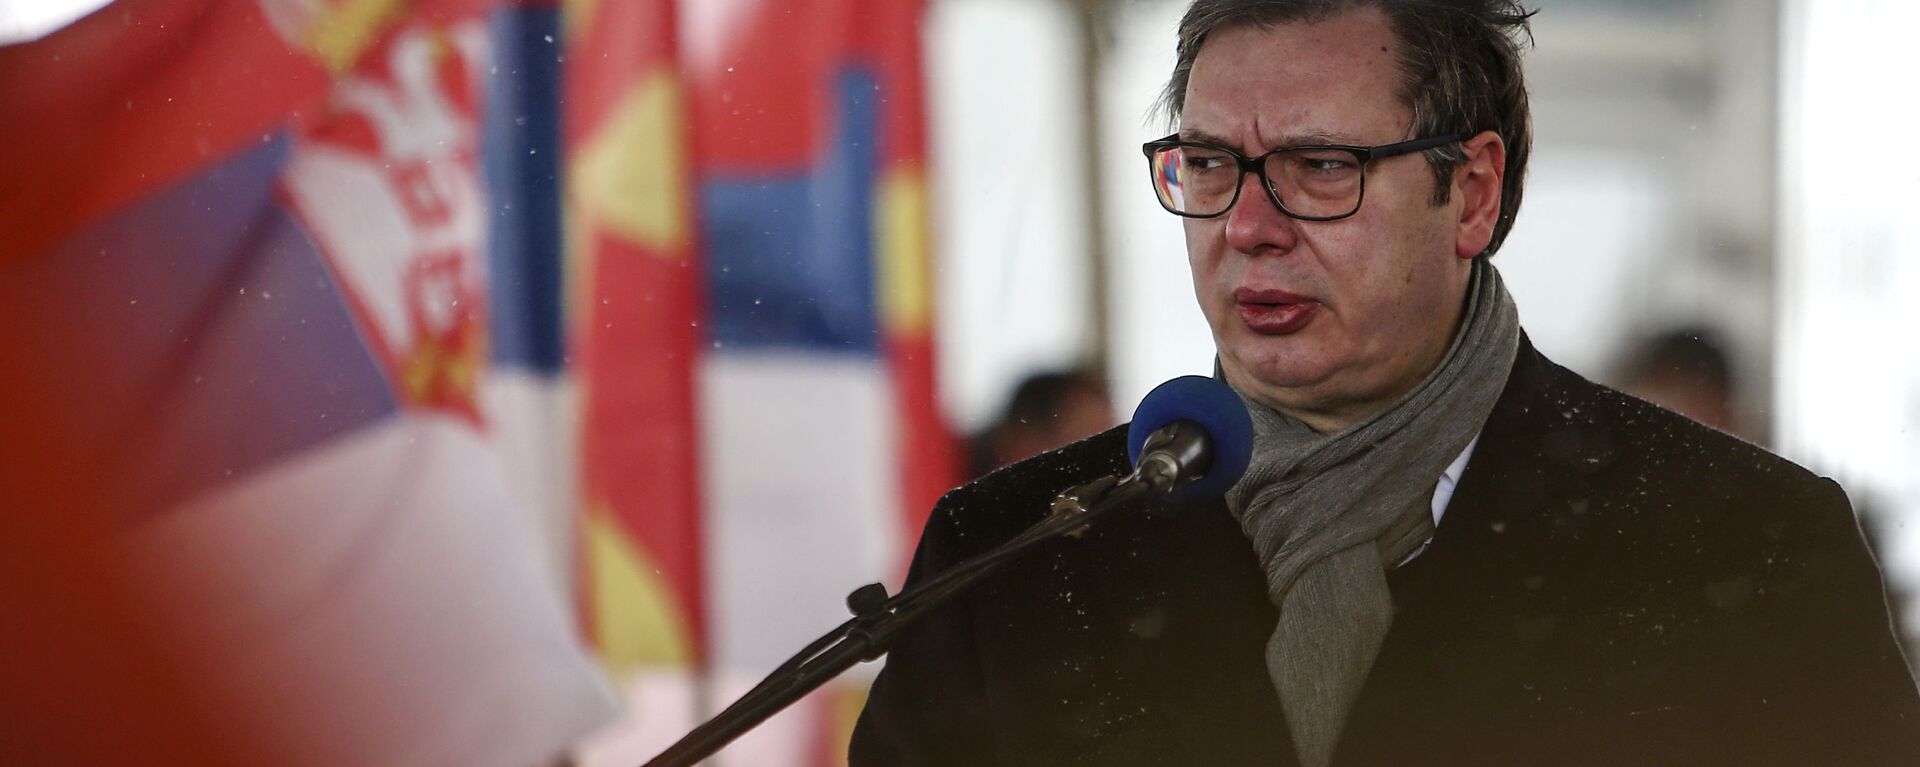 Serbia's President Aleksandar Vucic talks for the media at a news conference with North Macedonia's Prime Minister Zoran Zaev, not pictured, during a handover of COVID-19 vaccines, at the border crossing Tabanovce, between North Macedonia and Serbia, on Sunday, Feb. 14, 2021. - Sputnik International, 1920, 08.03.2021